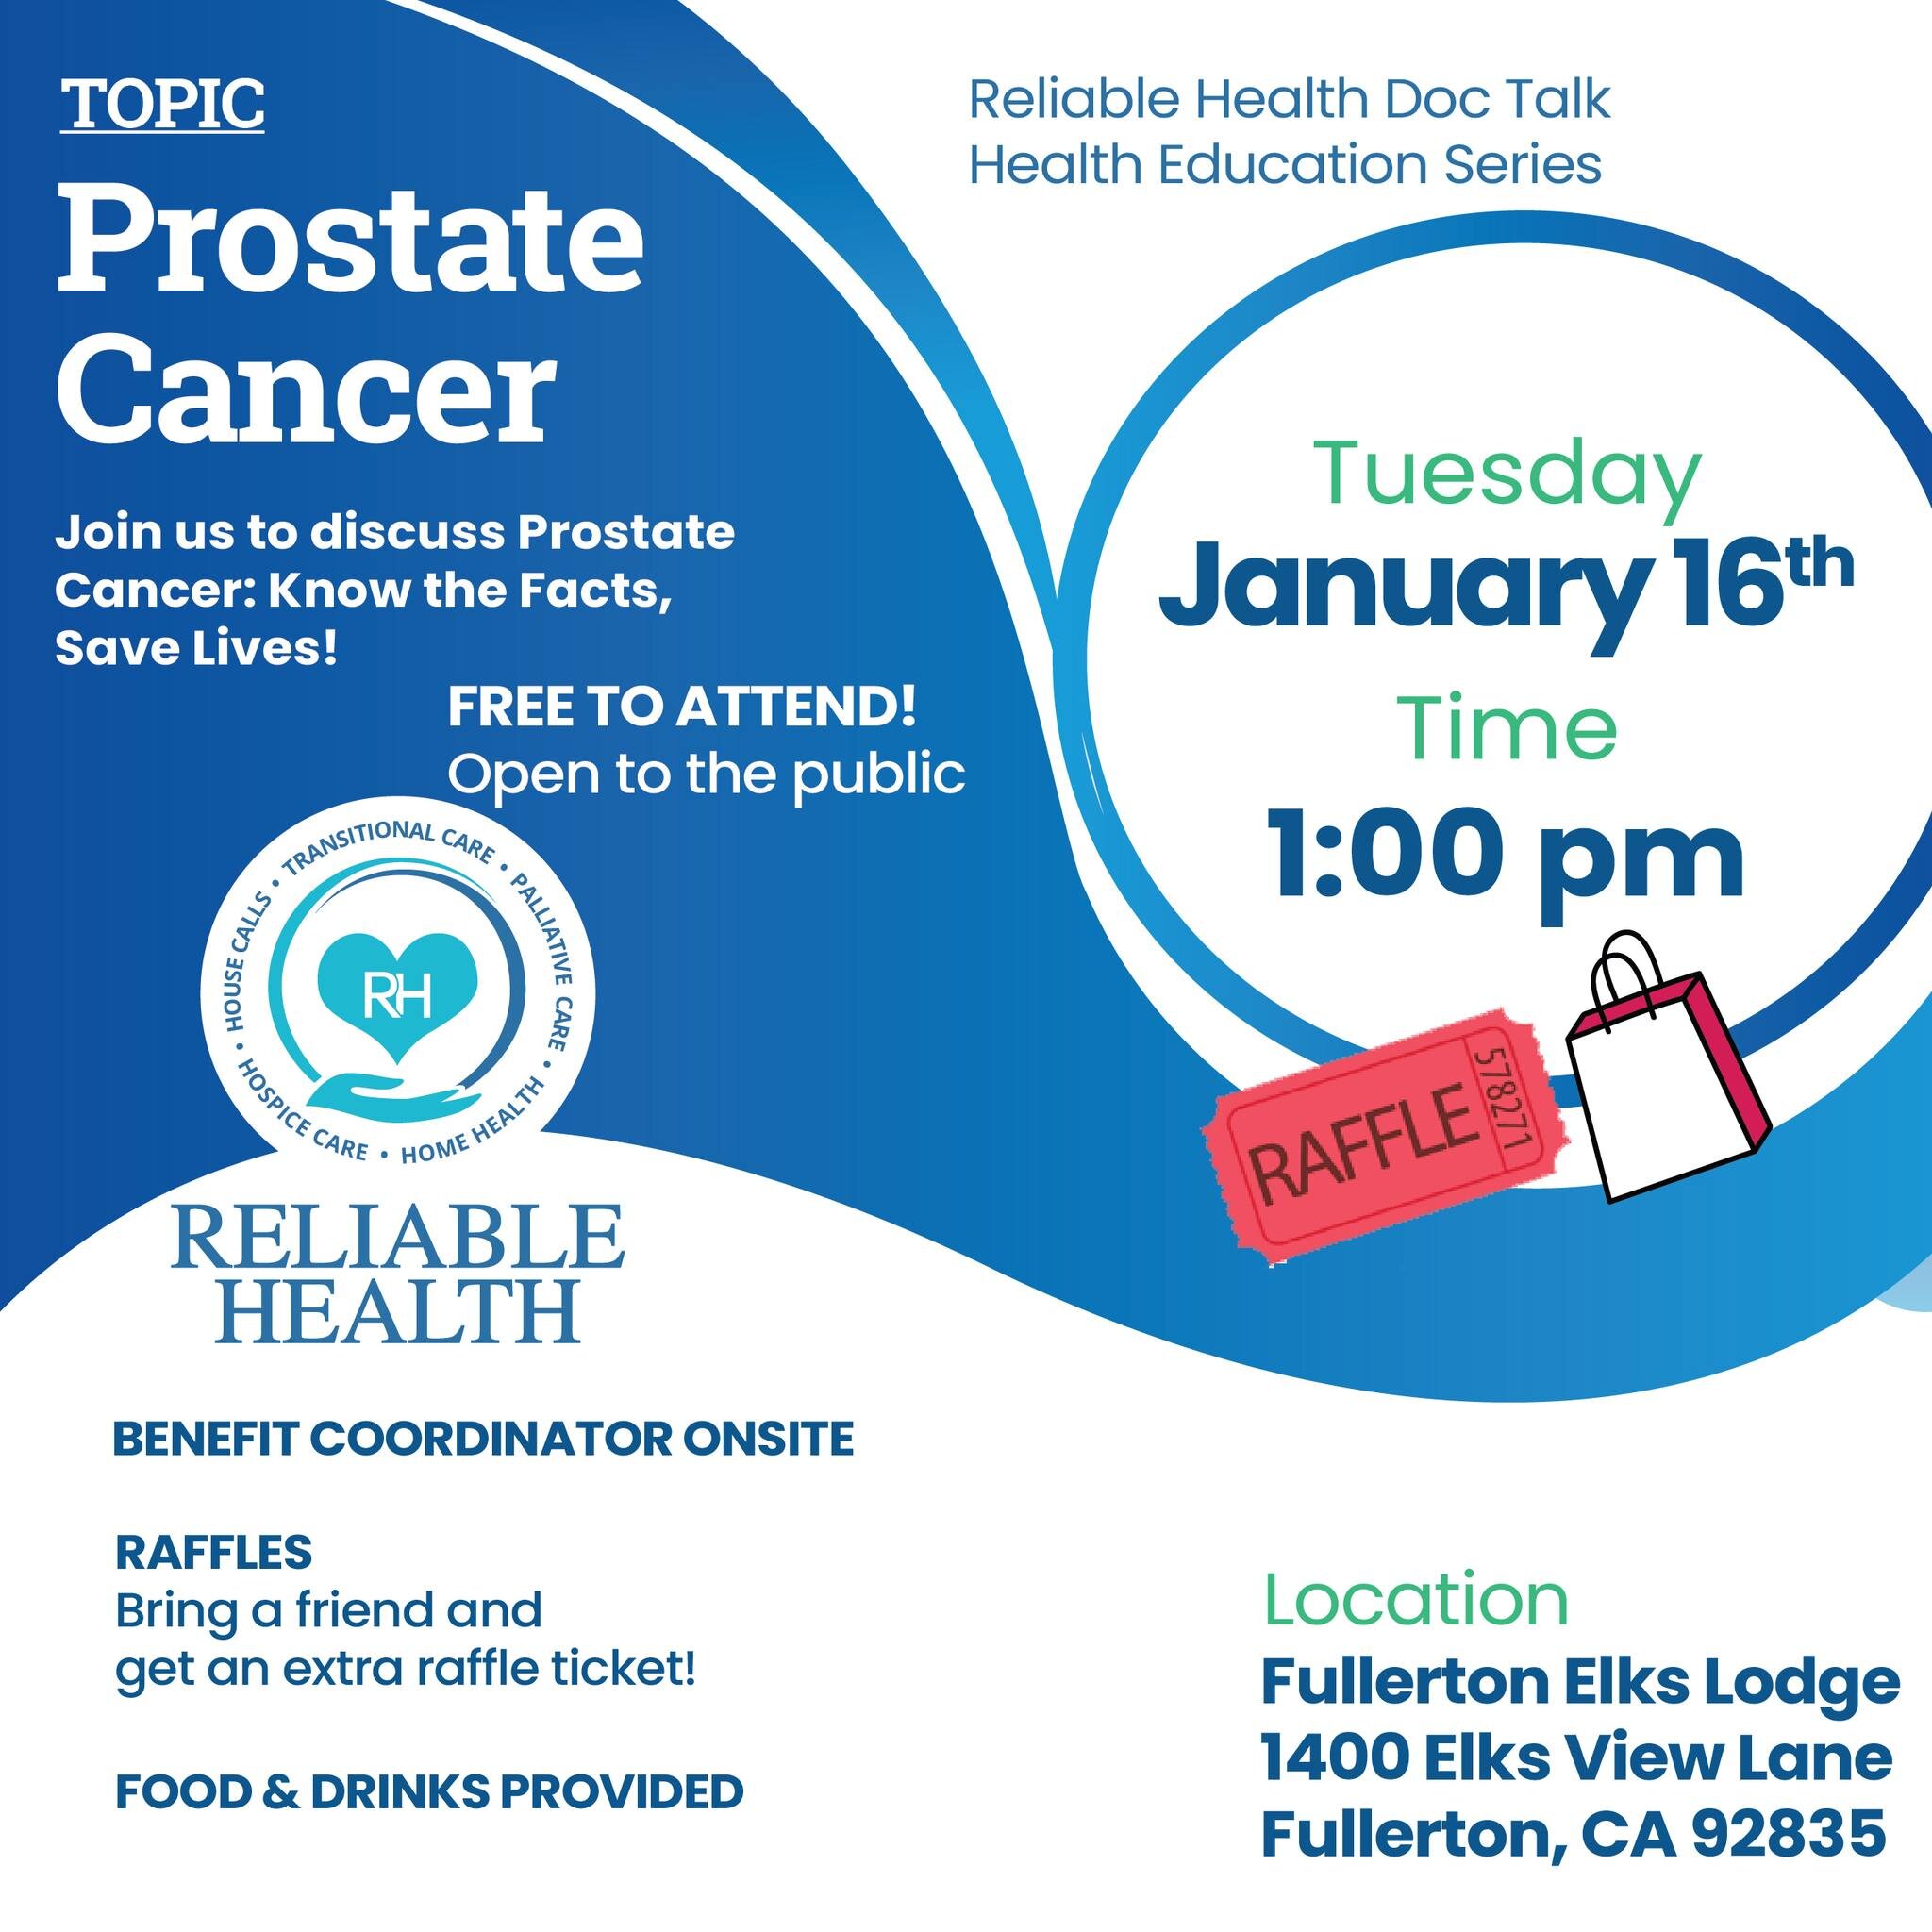 Free Reliable Health Doc Talk Health Education Event on January 16th, 2024. Free for all to attend at the Fullerton Elks Lodge

#prostatecancer #prostatecancerfree #prostatecancersucks #prostatecancersurvivor #prostatecancerawareness #fullertonelkslo